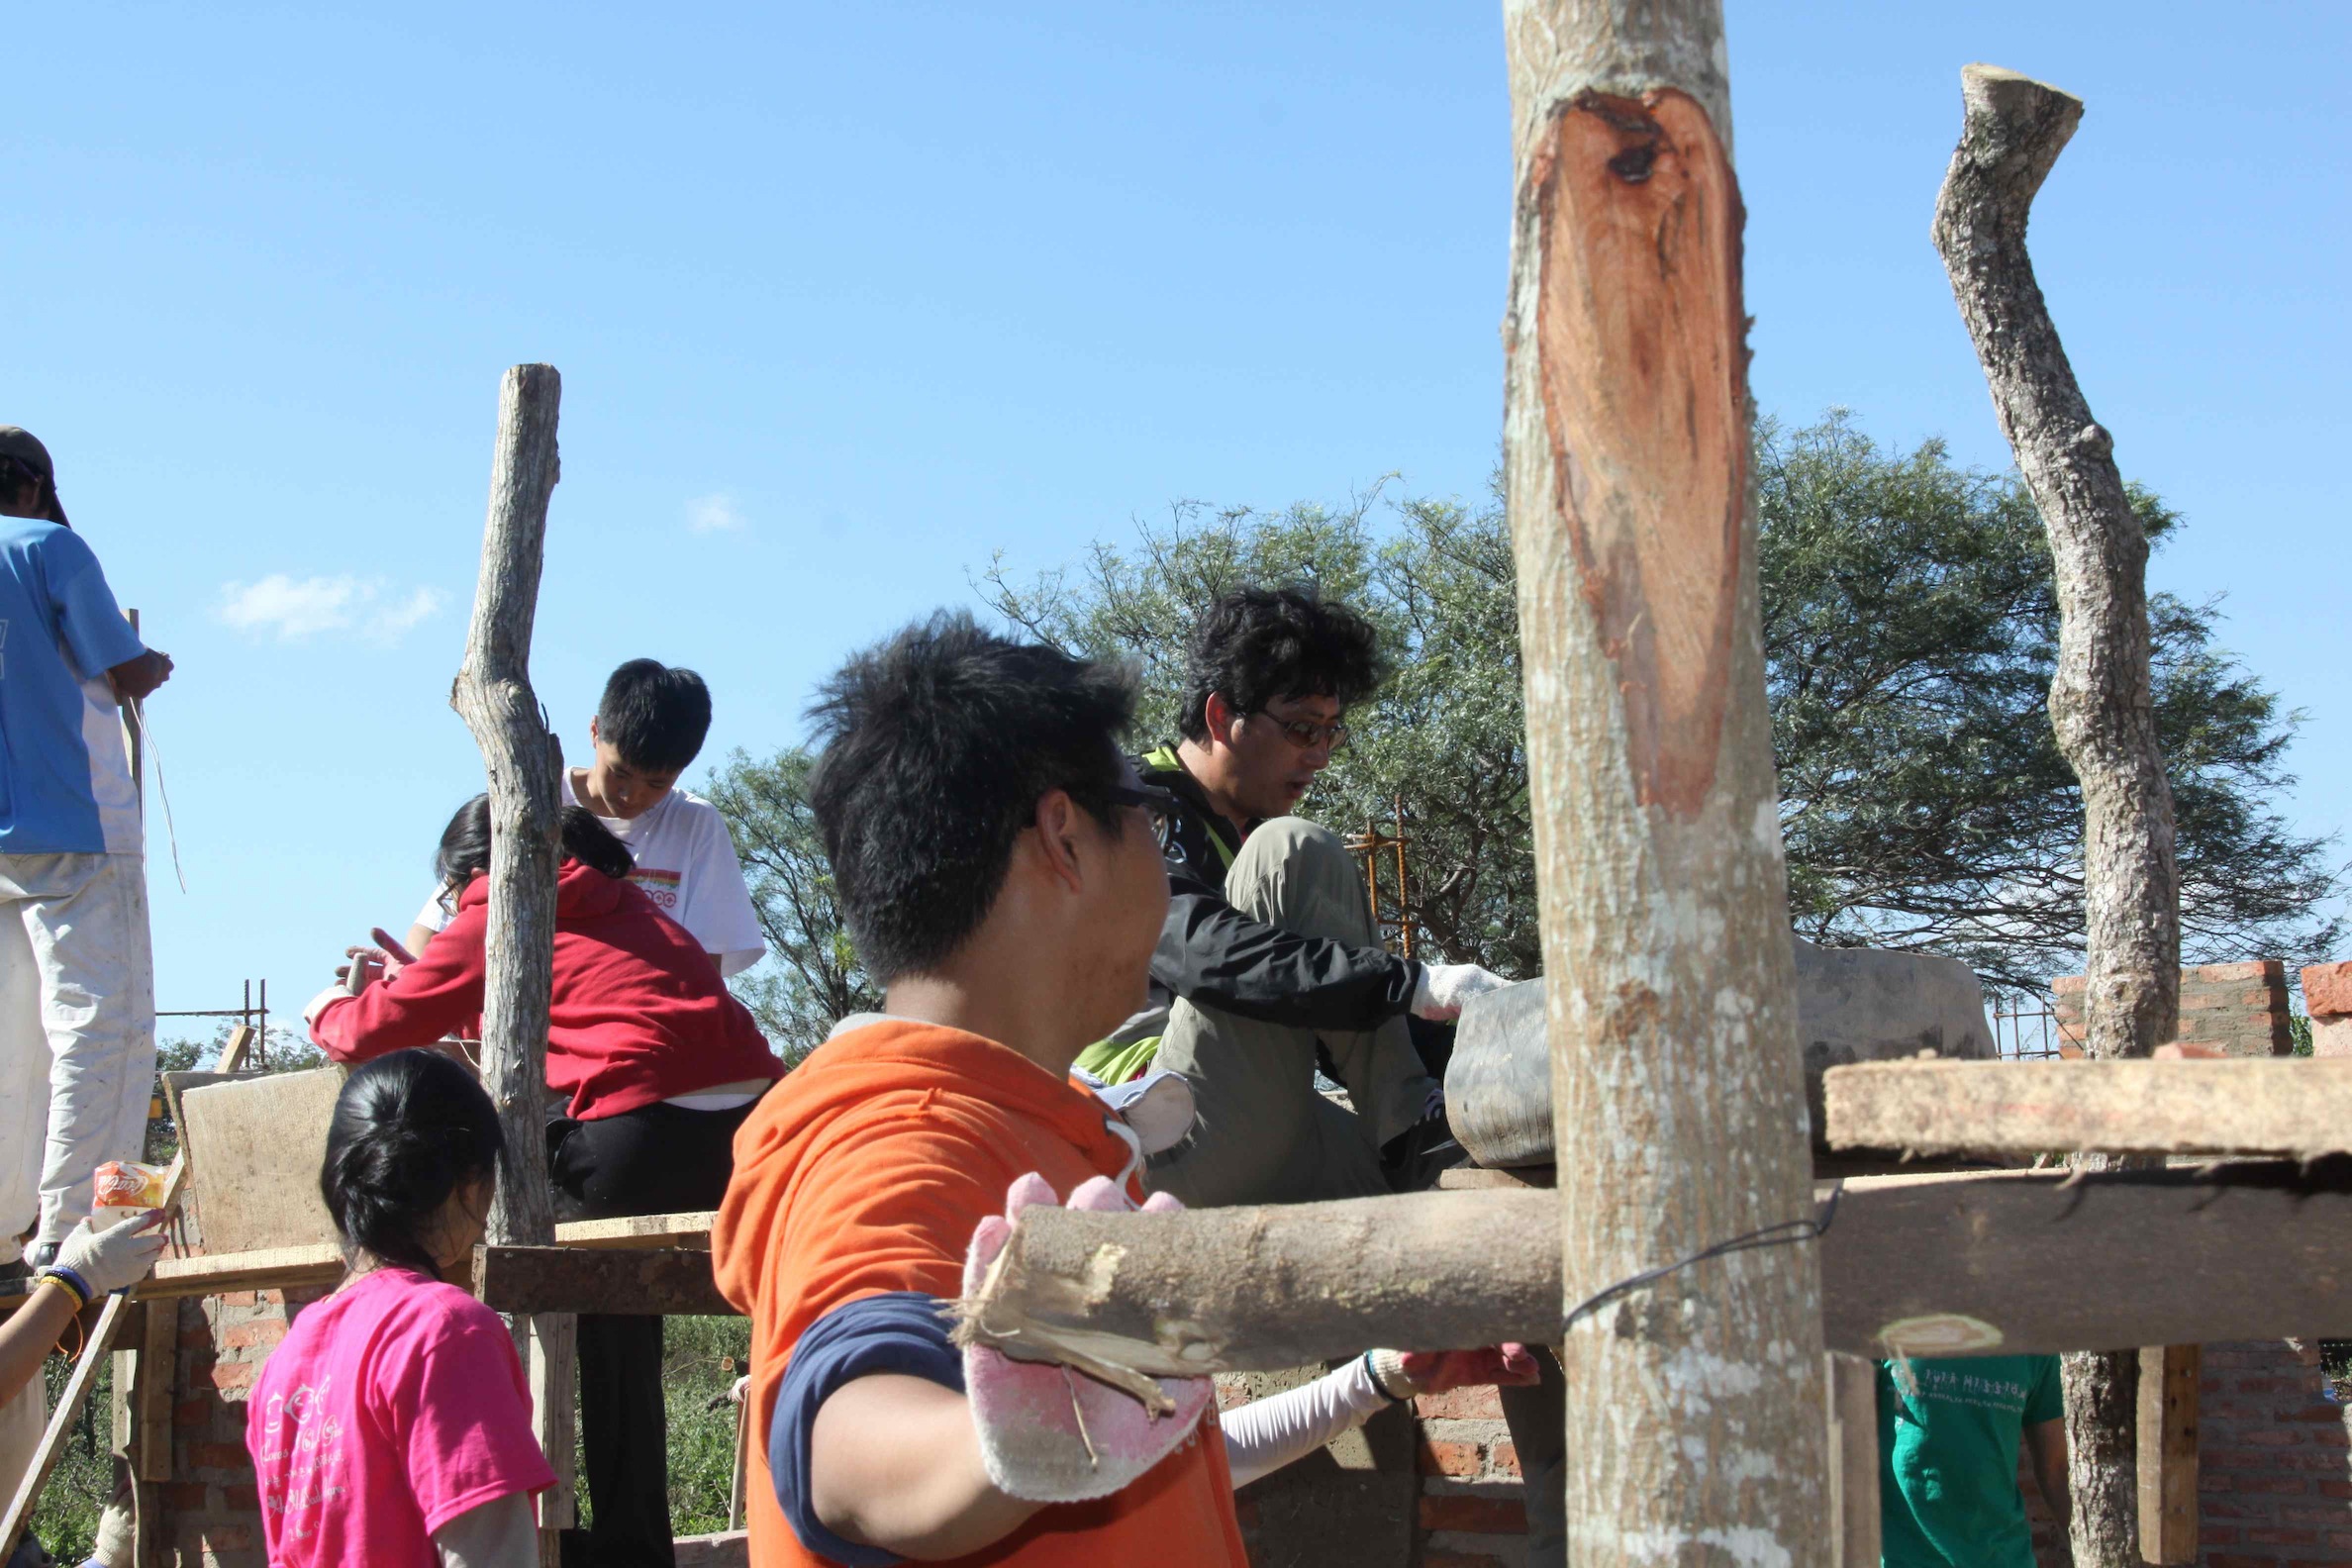 The Diocese of Brooklyn’s Korean Apostolate made its sixth annual mission trip to Cristo Salvador parish in Santa Cruz, Bolivia. Volunteer activities included building houses and visiting the local day-care center.